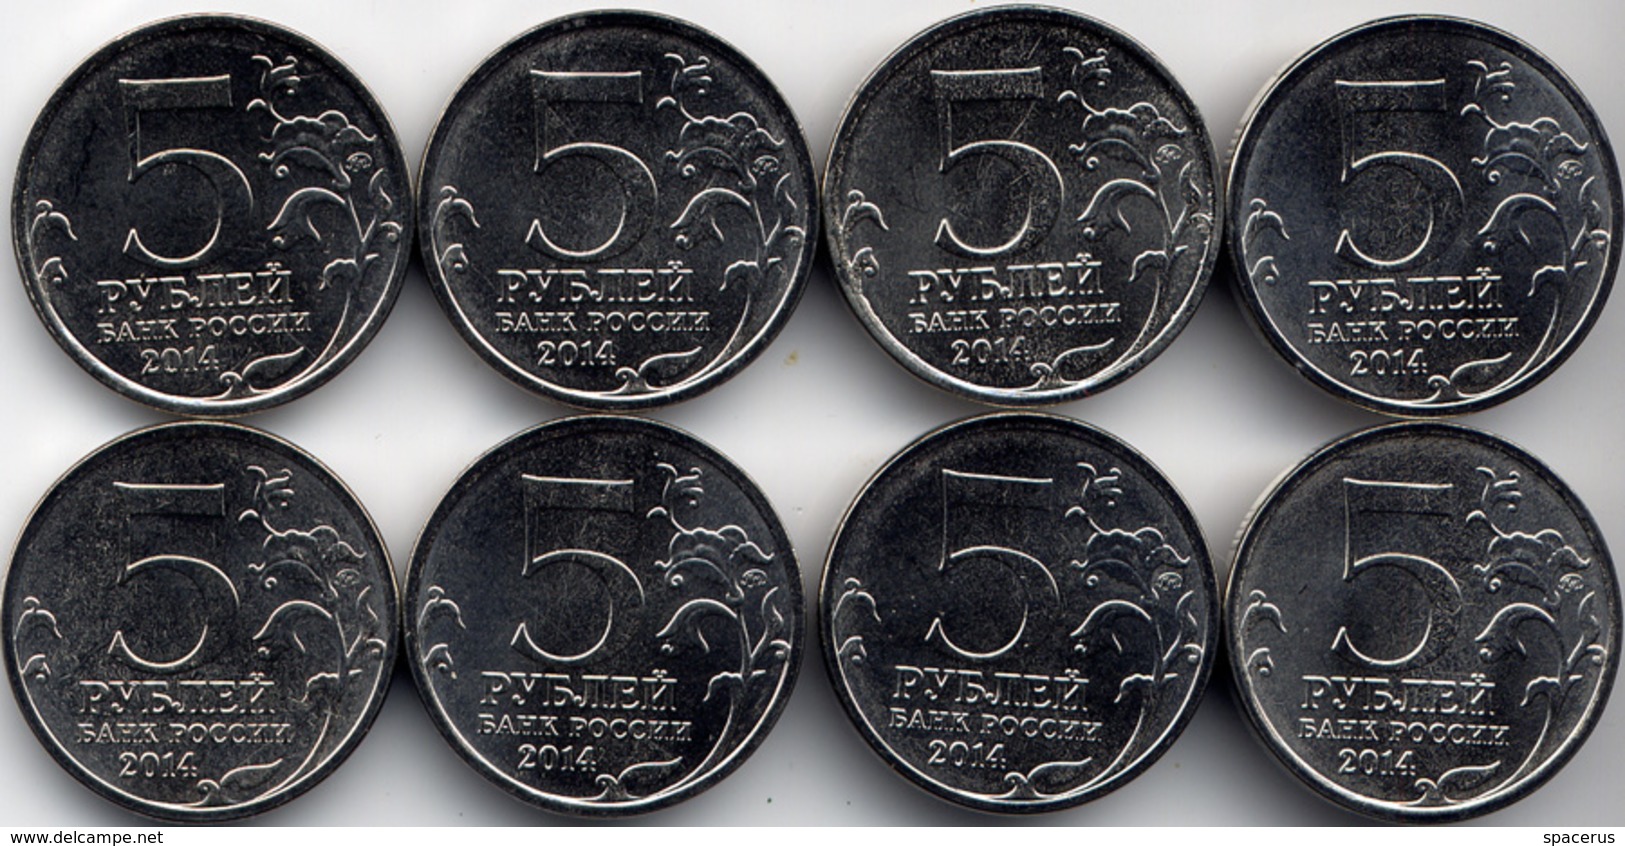 10 RUSSIA Coins Set 8x5 ROUBLES 2014 The Great Patriotic War 1945-2015 (8 Coins) - Russia